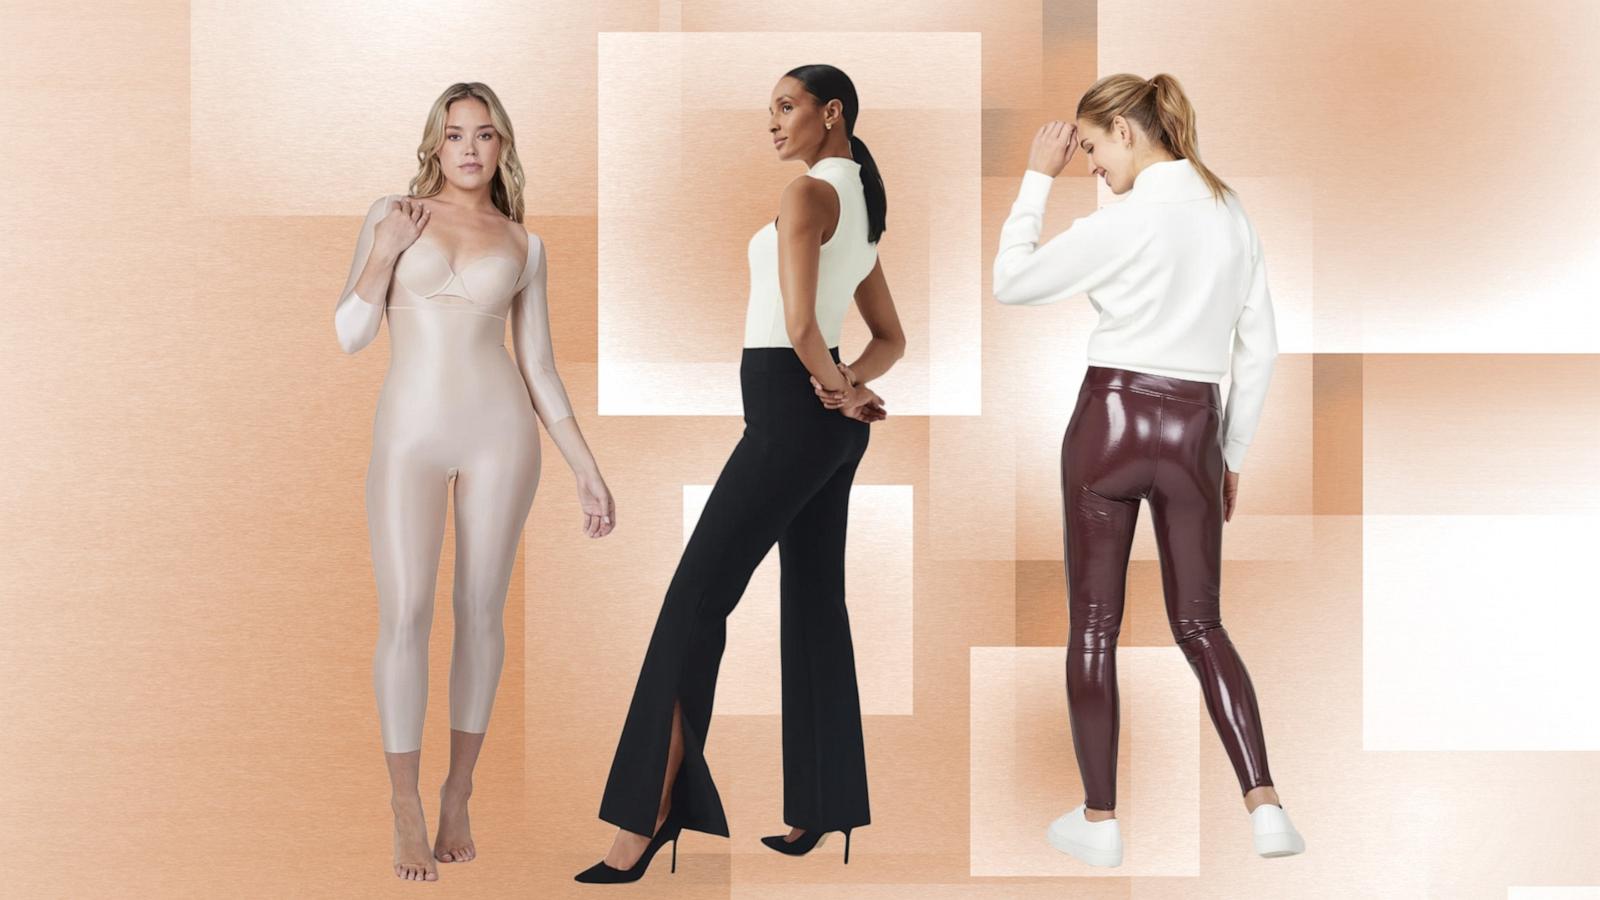 Travel Clothes Are Up to 70% Off at the Spanx Sale